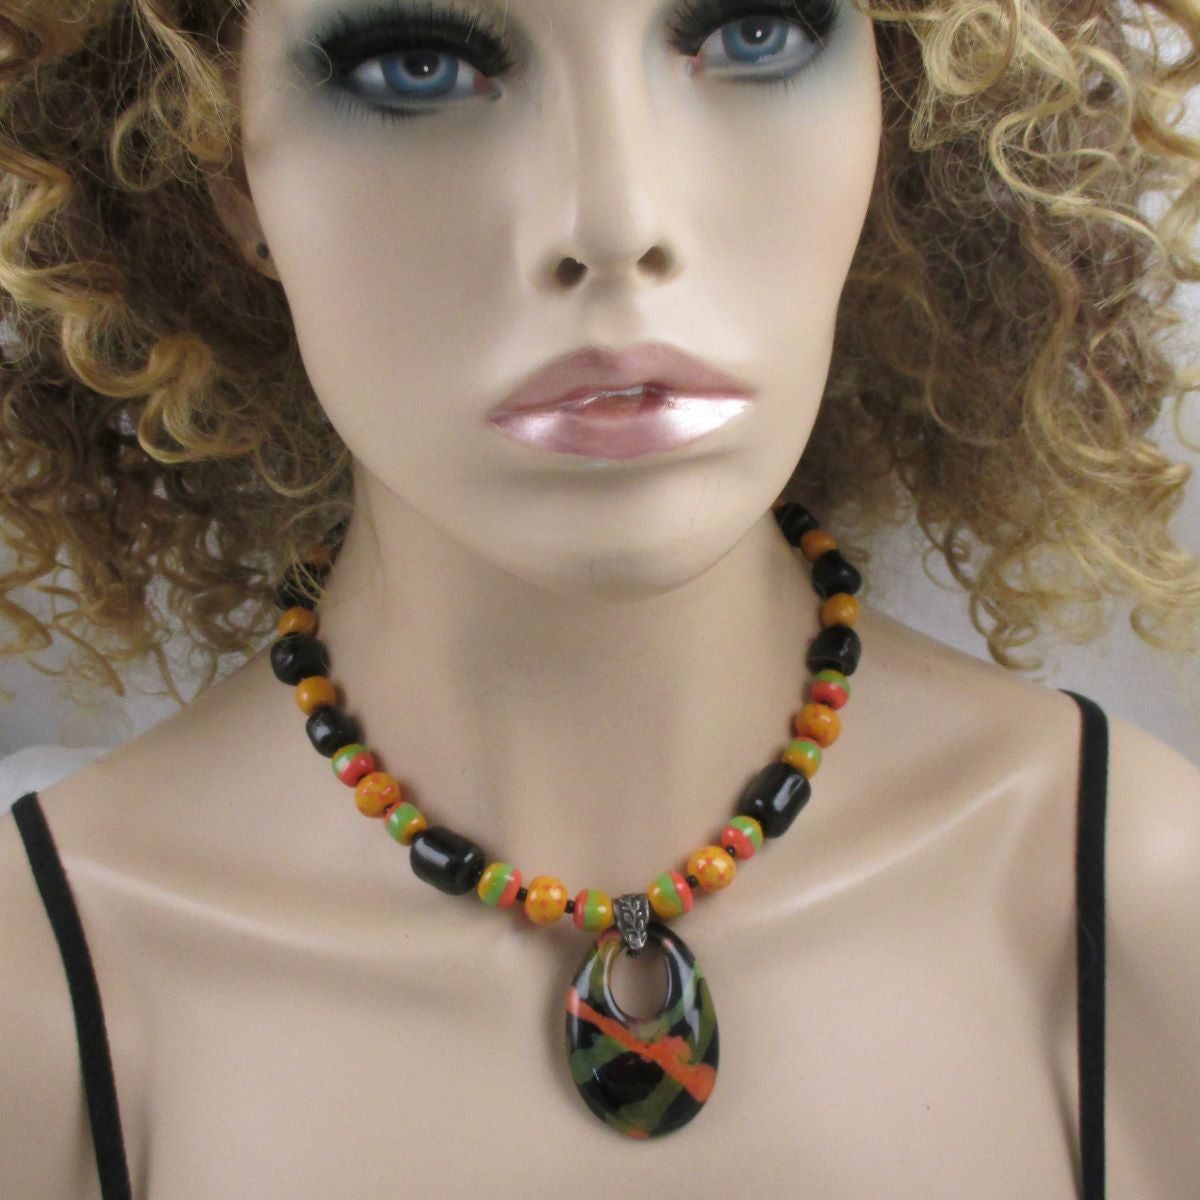 African Kazuri Necklace in Black, Green and Buttercup - VP's Jewelry